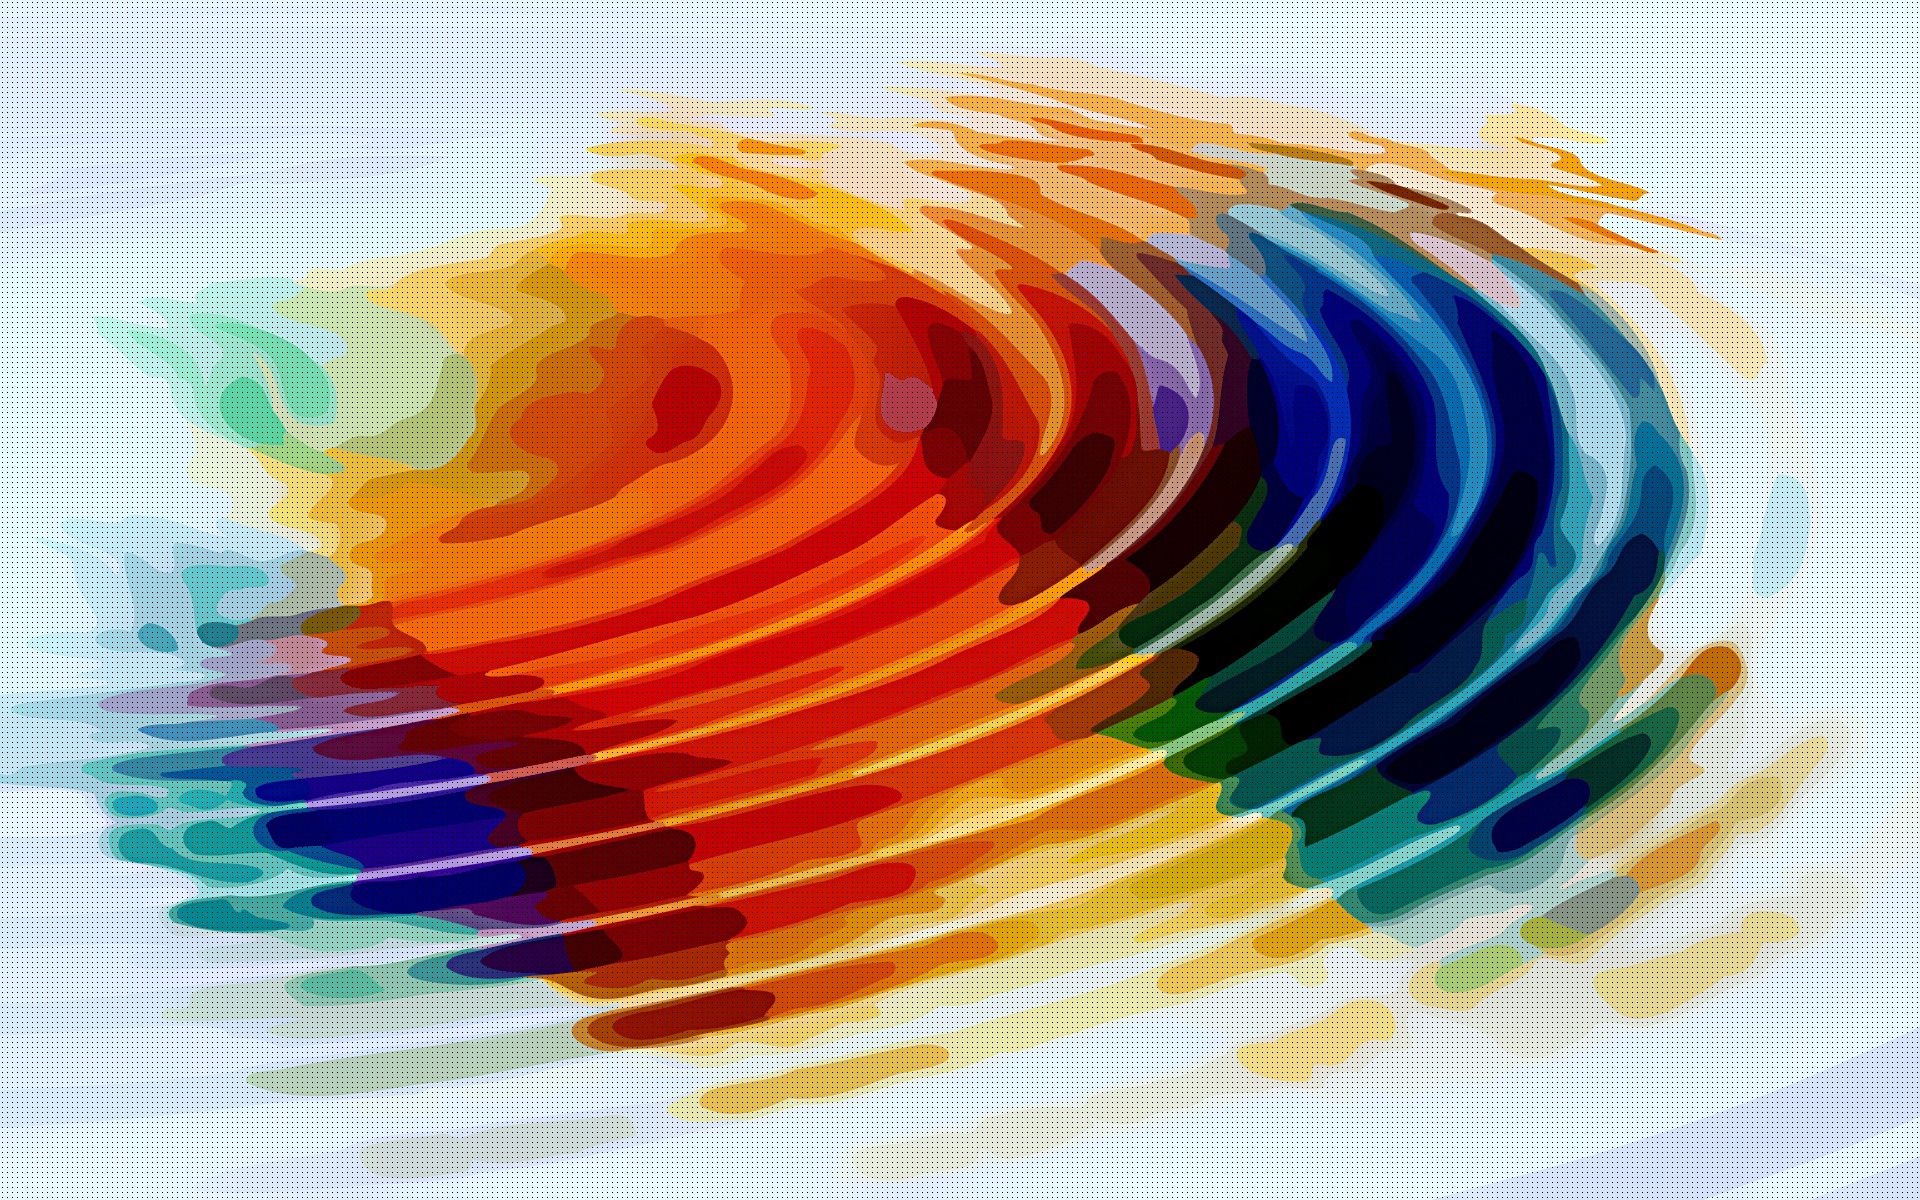 Windows Backgrounds color, abstract, waves, rainbow, colors